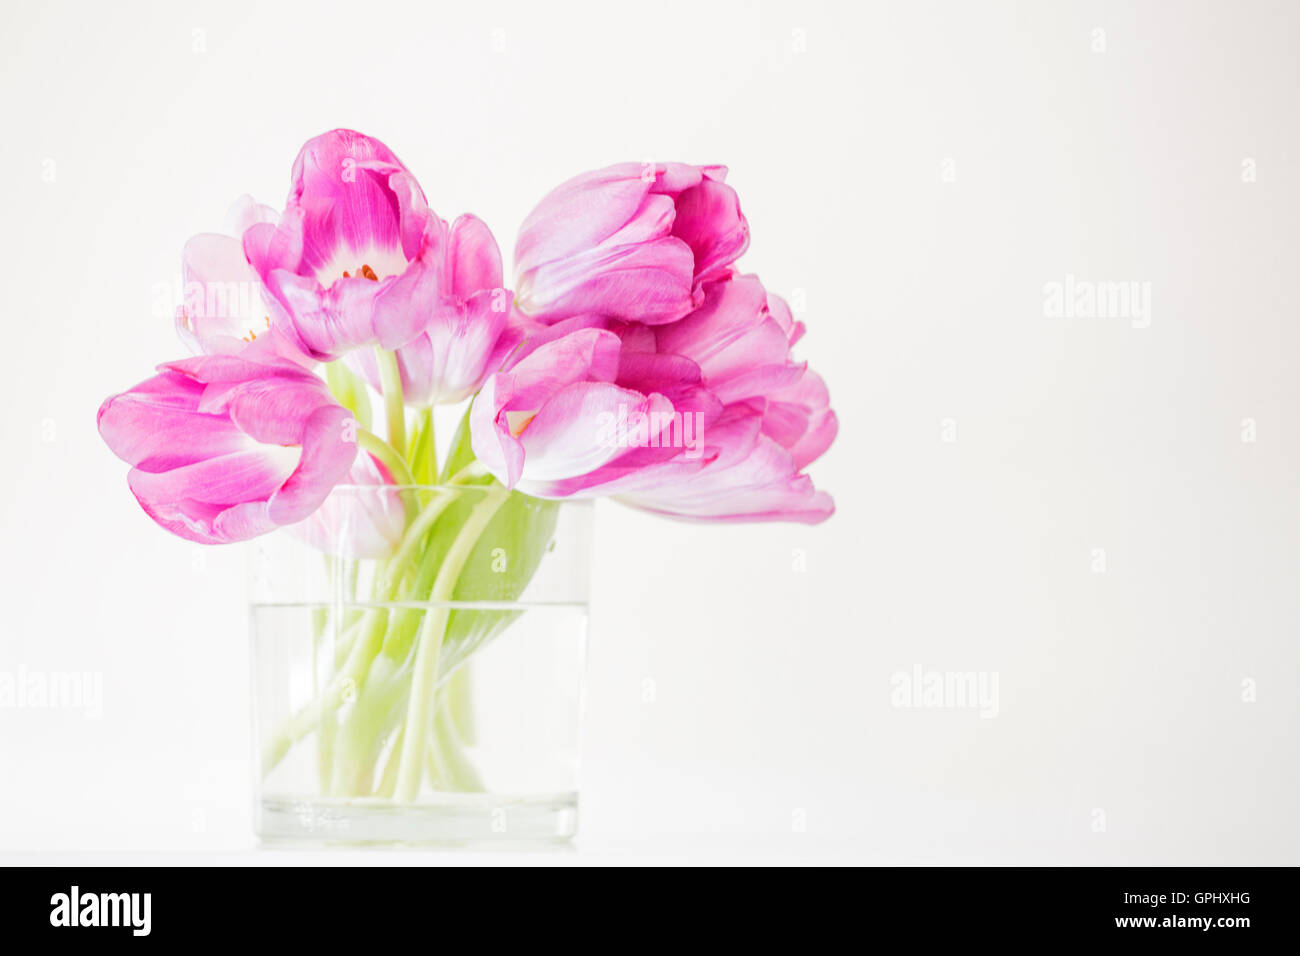 A glass vase of vibrant pink tulips set against a white background. Stock Photo